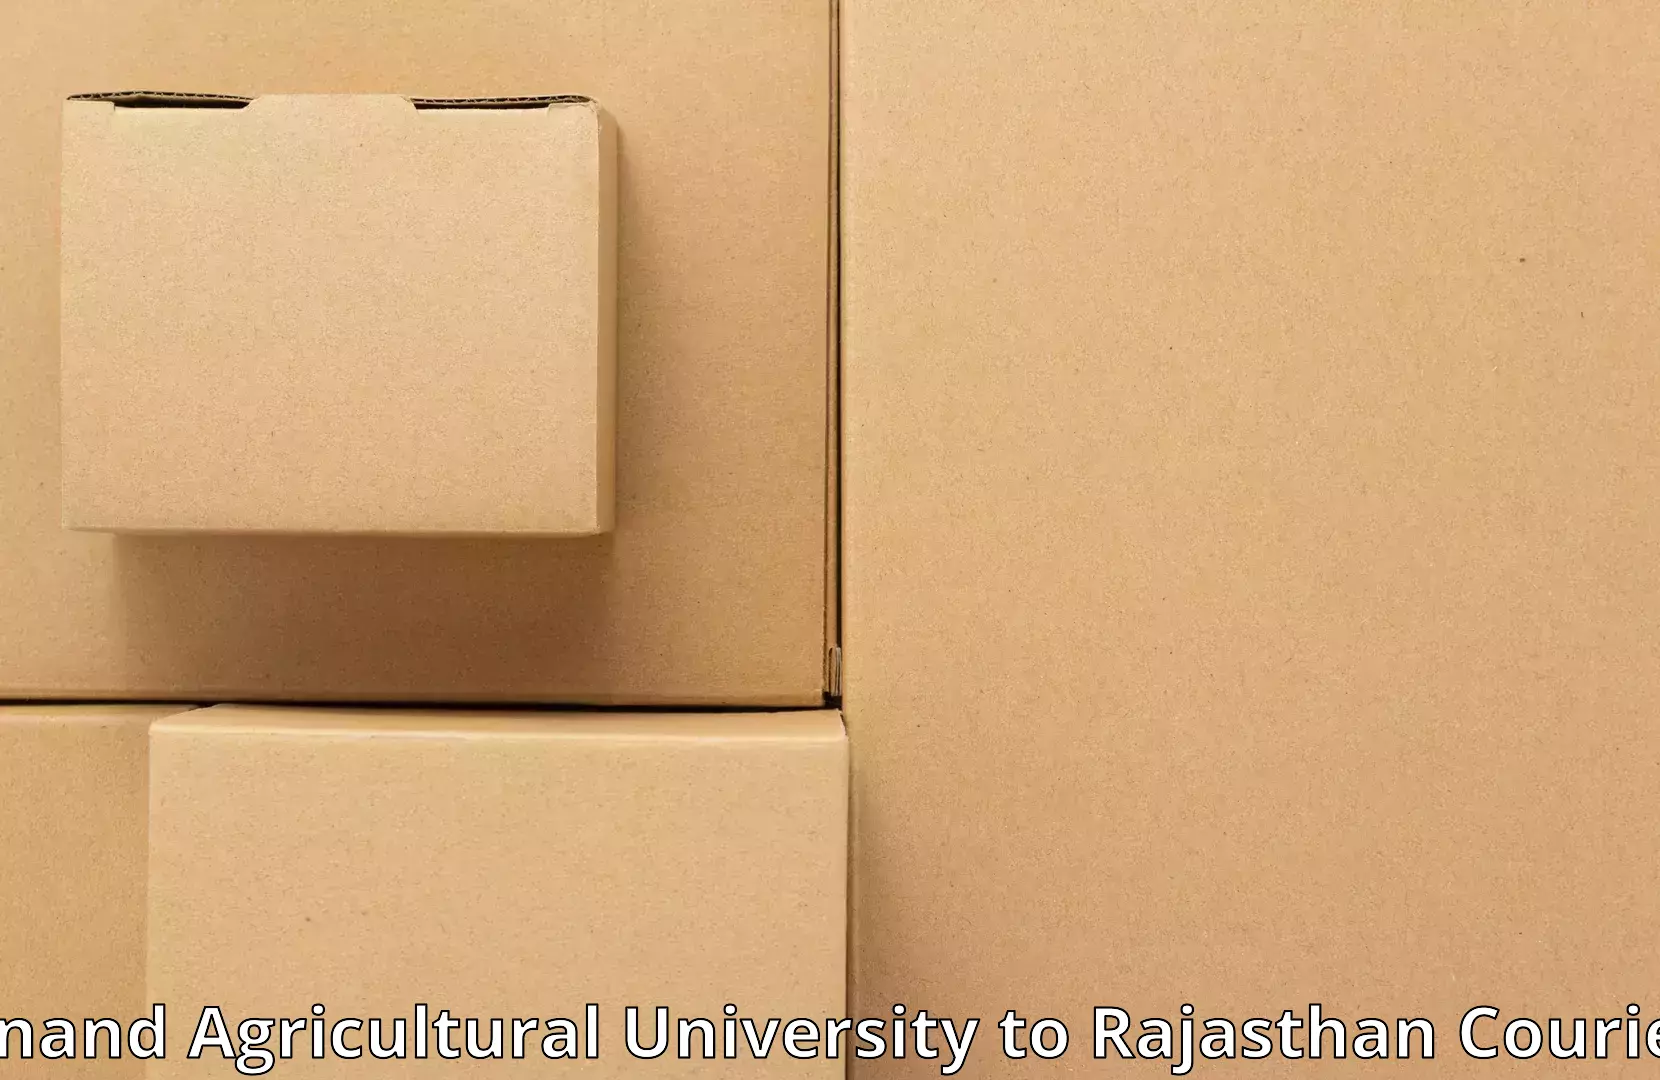 Furniture transport and storage Anand Agricultural University to Tibbi